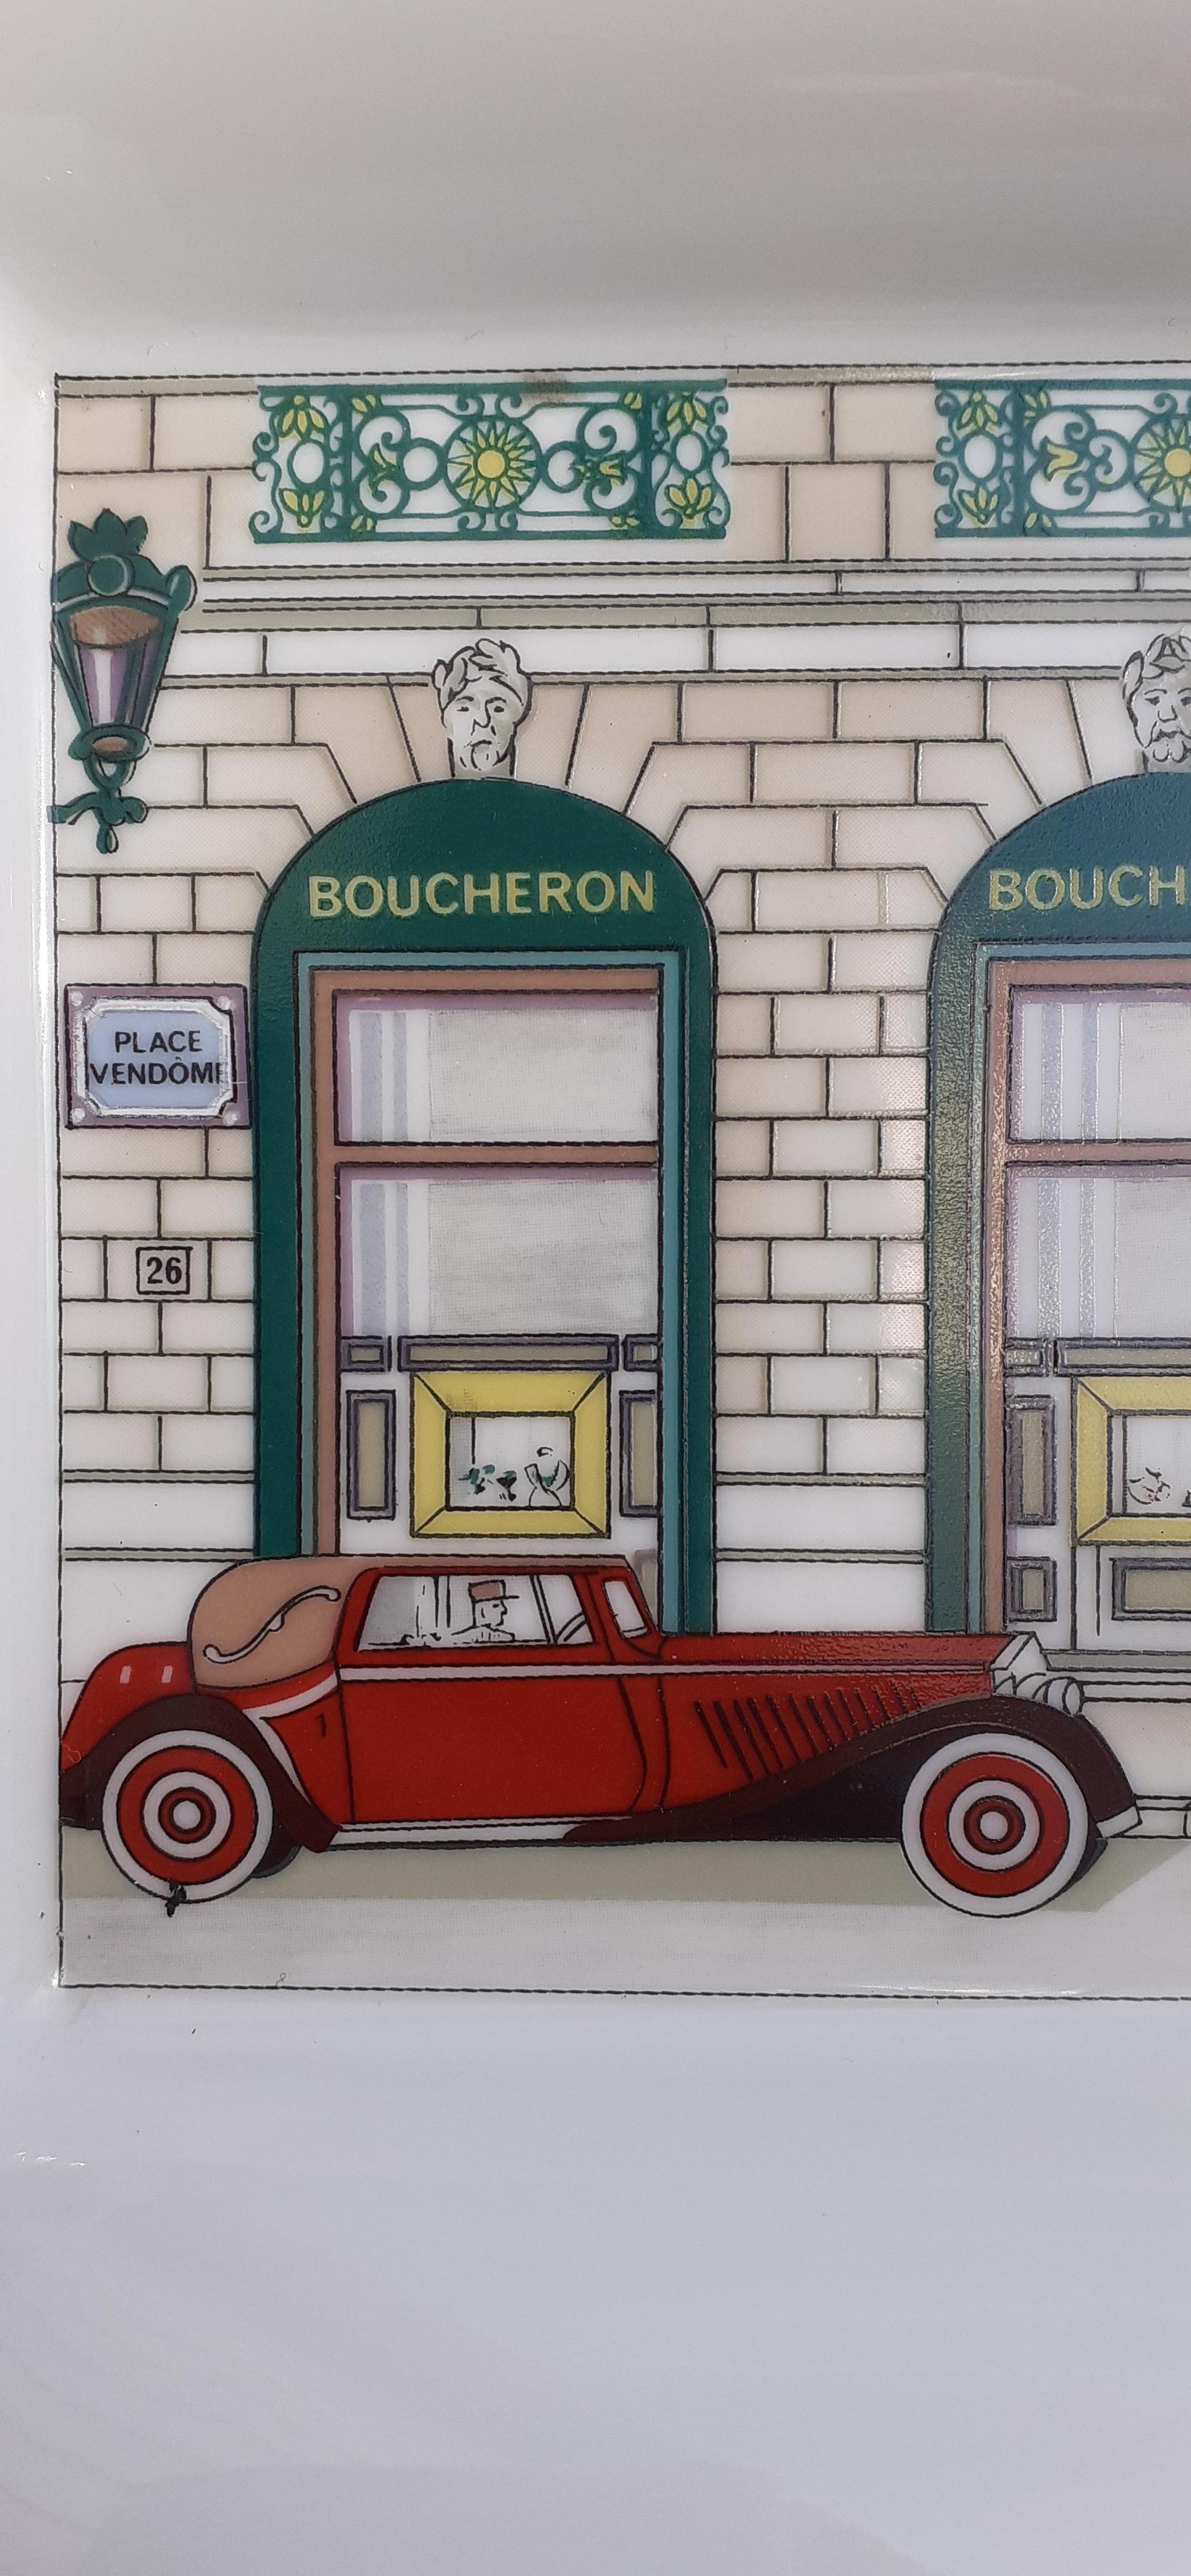 Beautiful Authentic Hermès Ashtray

Pattern: Boucheron store window, 26 Place Vendôme Paris, FRANCE

Made in France 

Vintage Item

Made of Porcelain

Colorways: White, Green, Red, Yellow

The drawing is covered with varnish, which gives it a